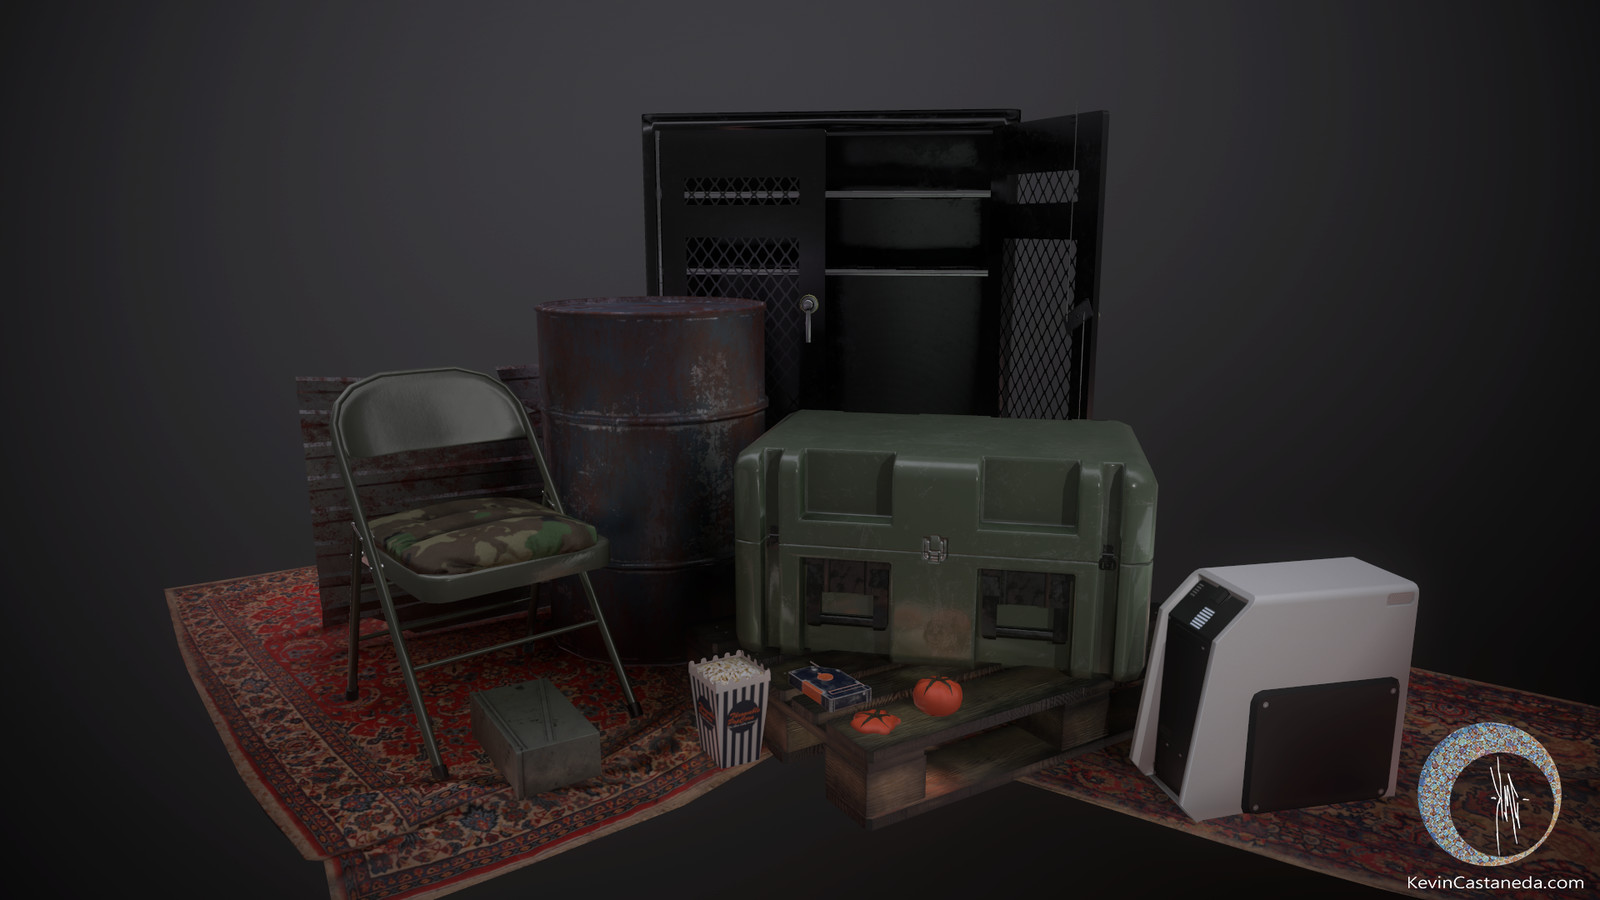 Variation of props from the CSGO lobby. Cloth was done in Marvelous Designer. Textures in Substance Painter. Modeled in Maya.